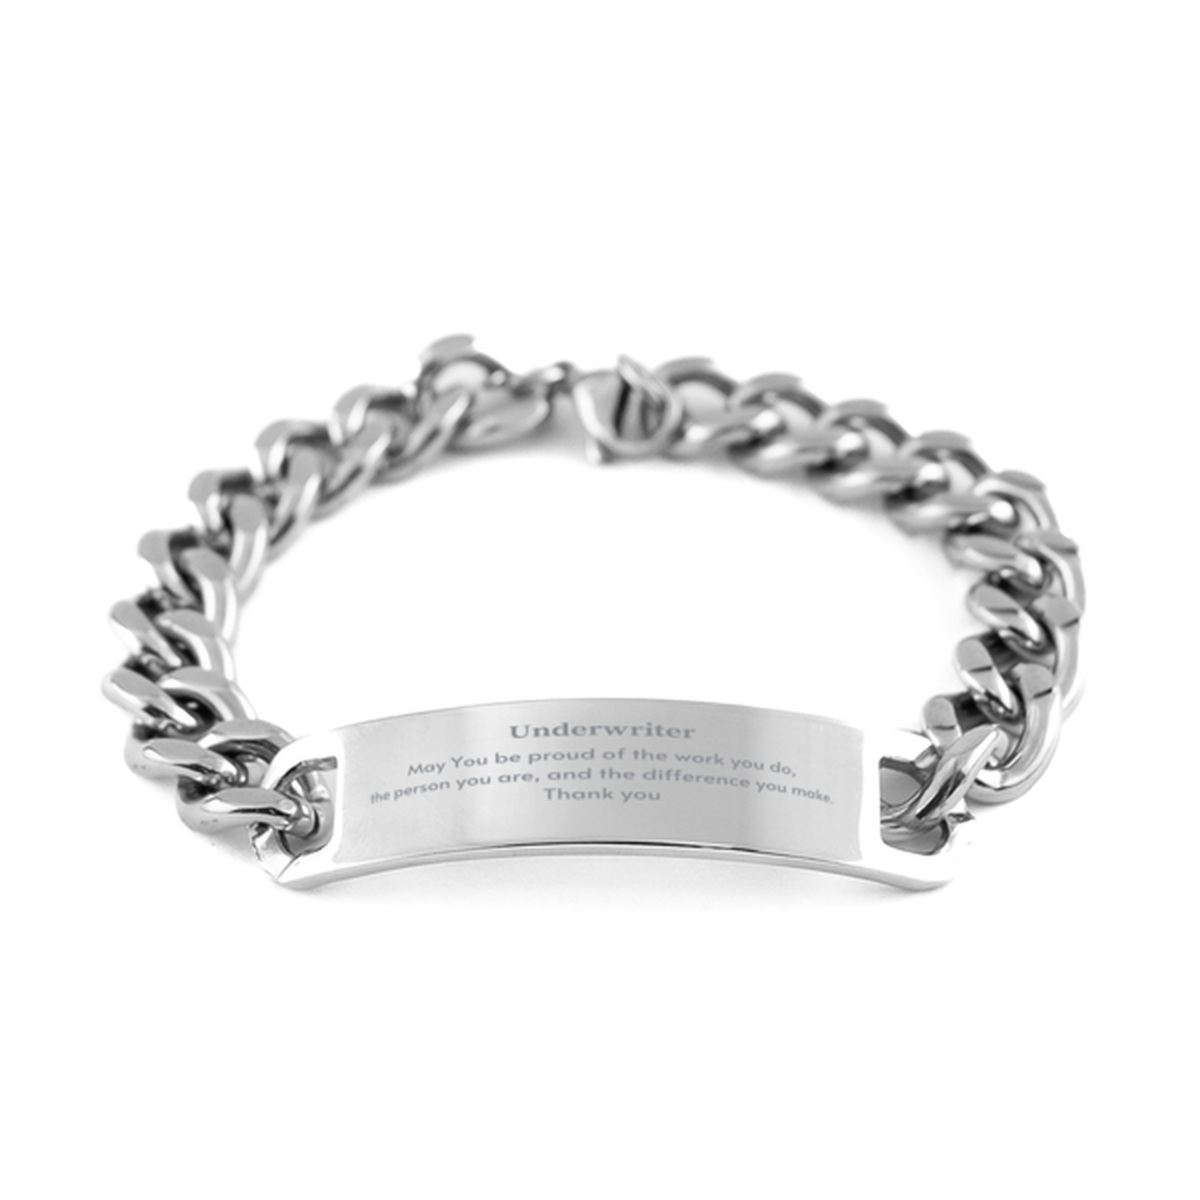 Heartwarming Cuban Chain Stainless Steel Bracelet Retirement Coworkers Gifts for Underwriter, Underwriter May You be proud of the work you do, the person you are Gifts for Boss Men Women Friends